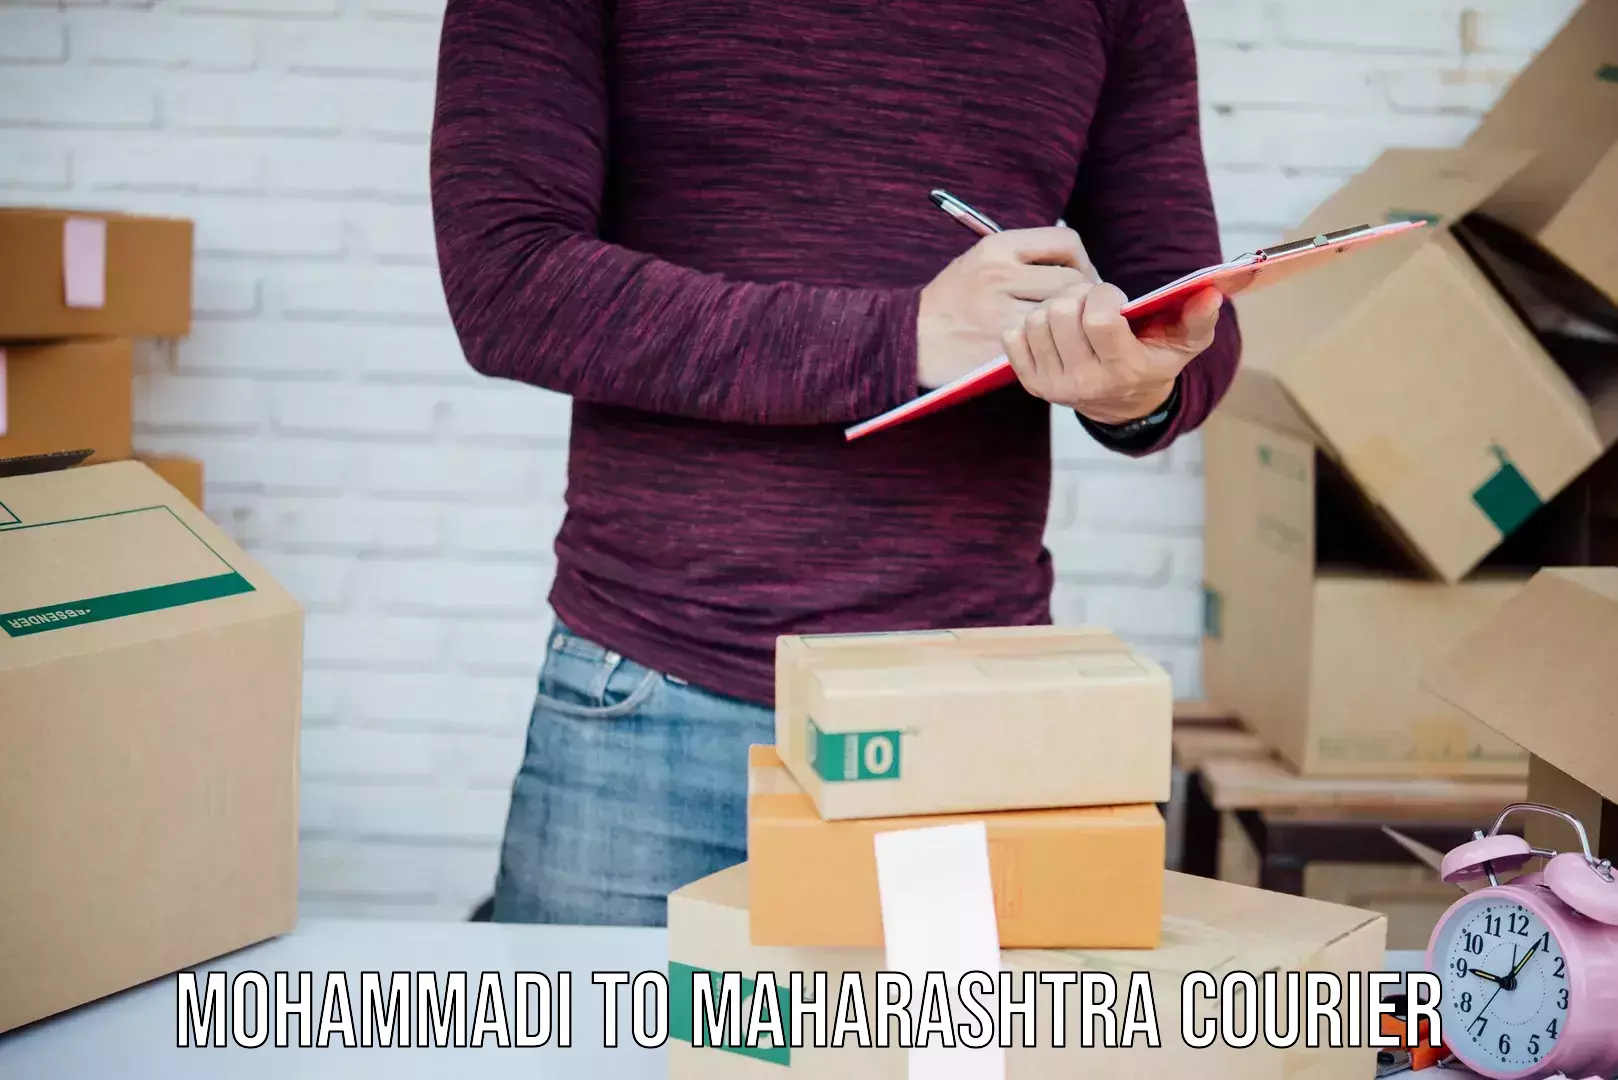 Personal parcel delivery in Mohammadi to Maharashtra